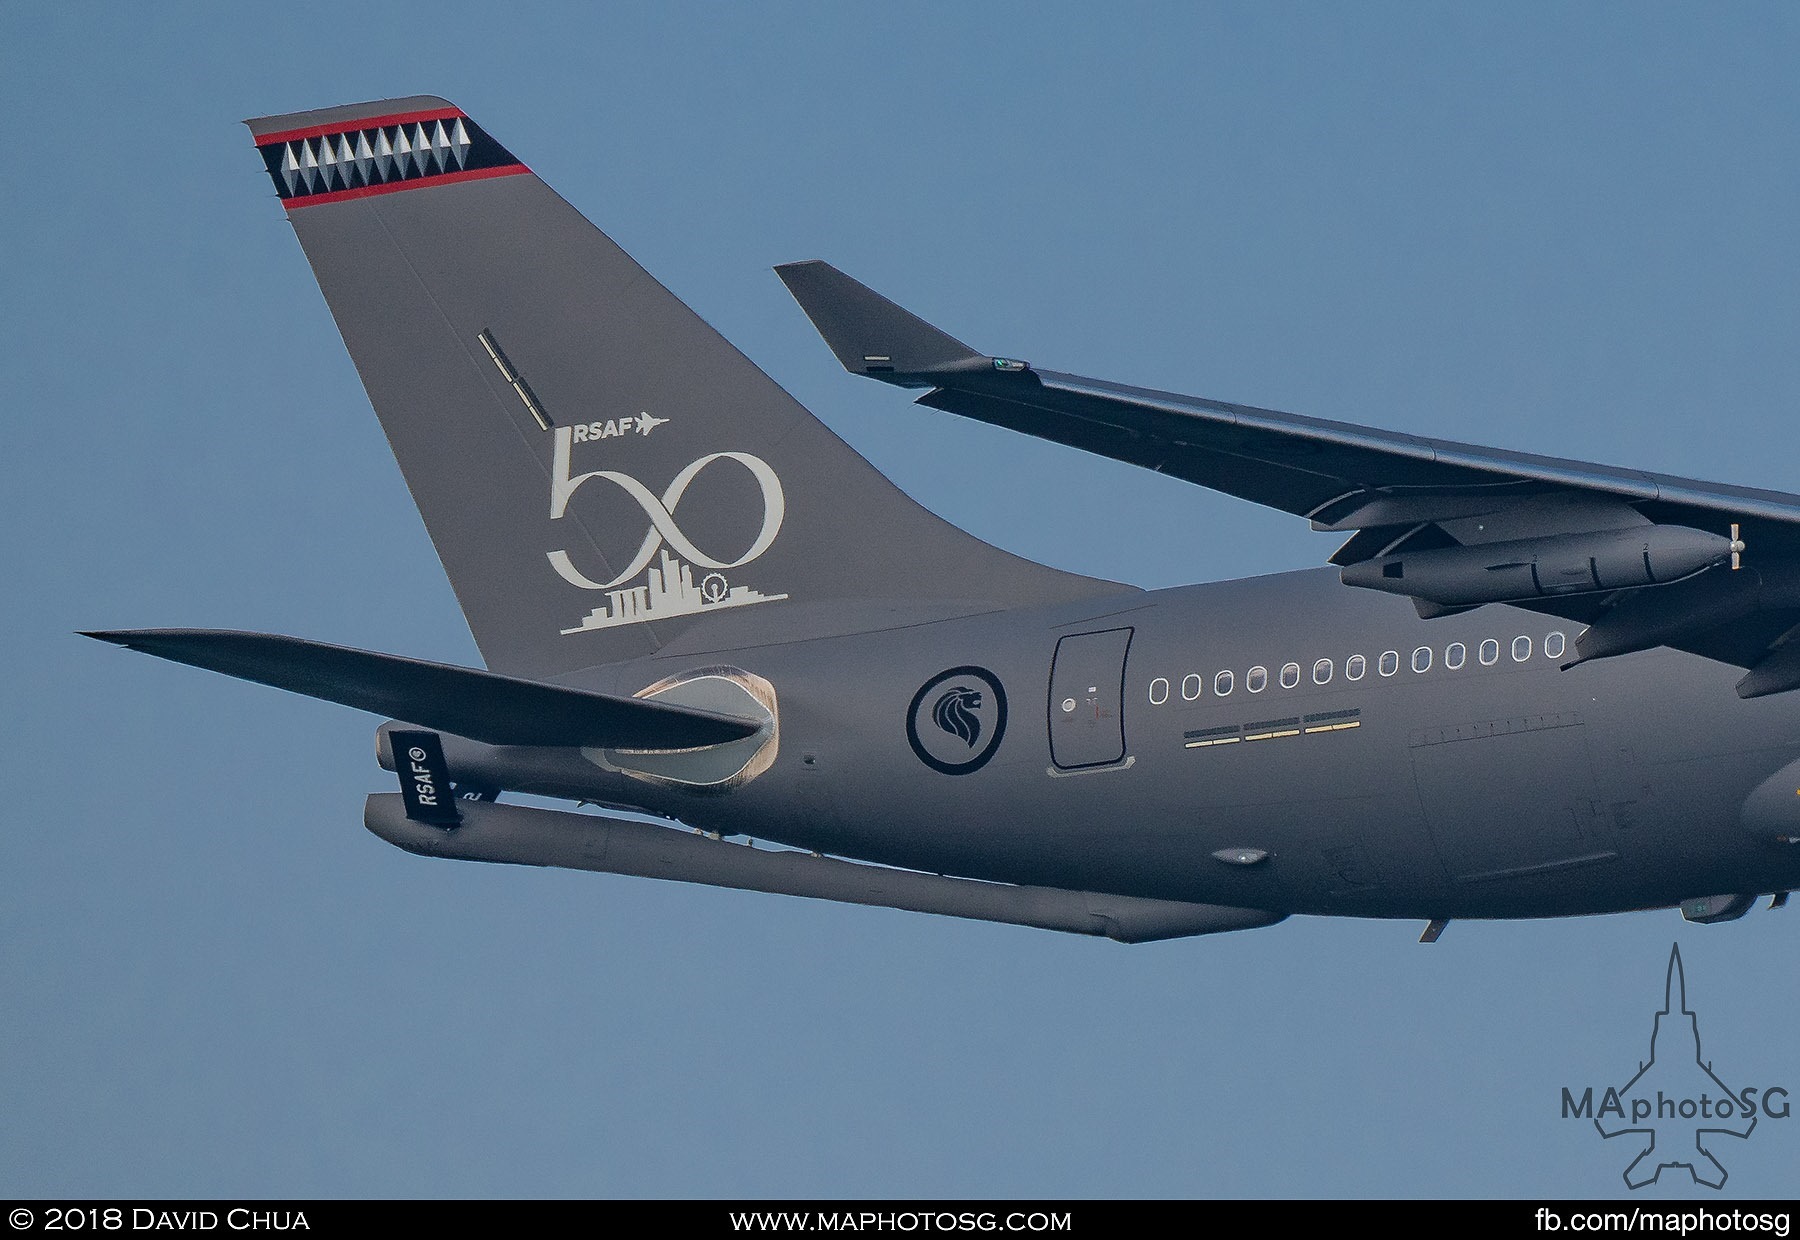 RSAF50 Tail Fin Detail of Republic of Singapore Air Force A330-MRTT (761)